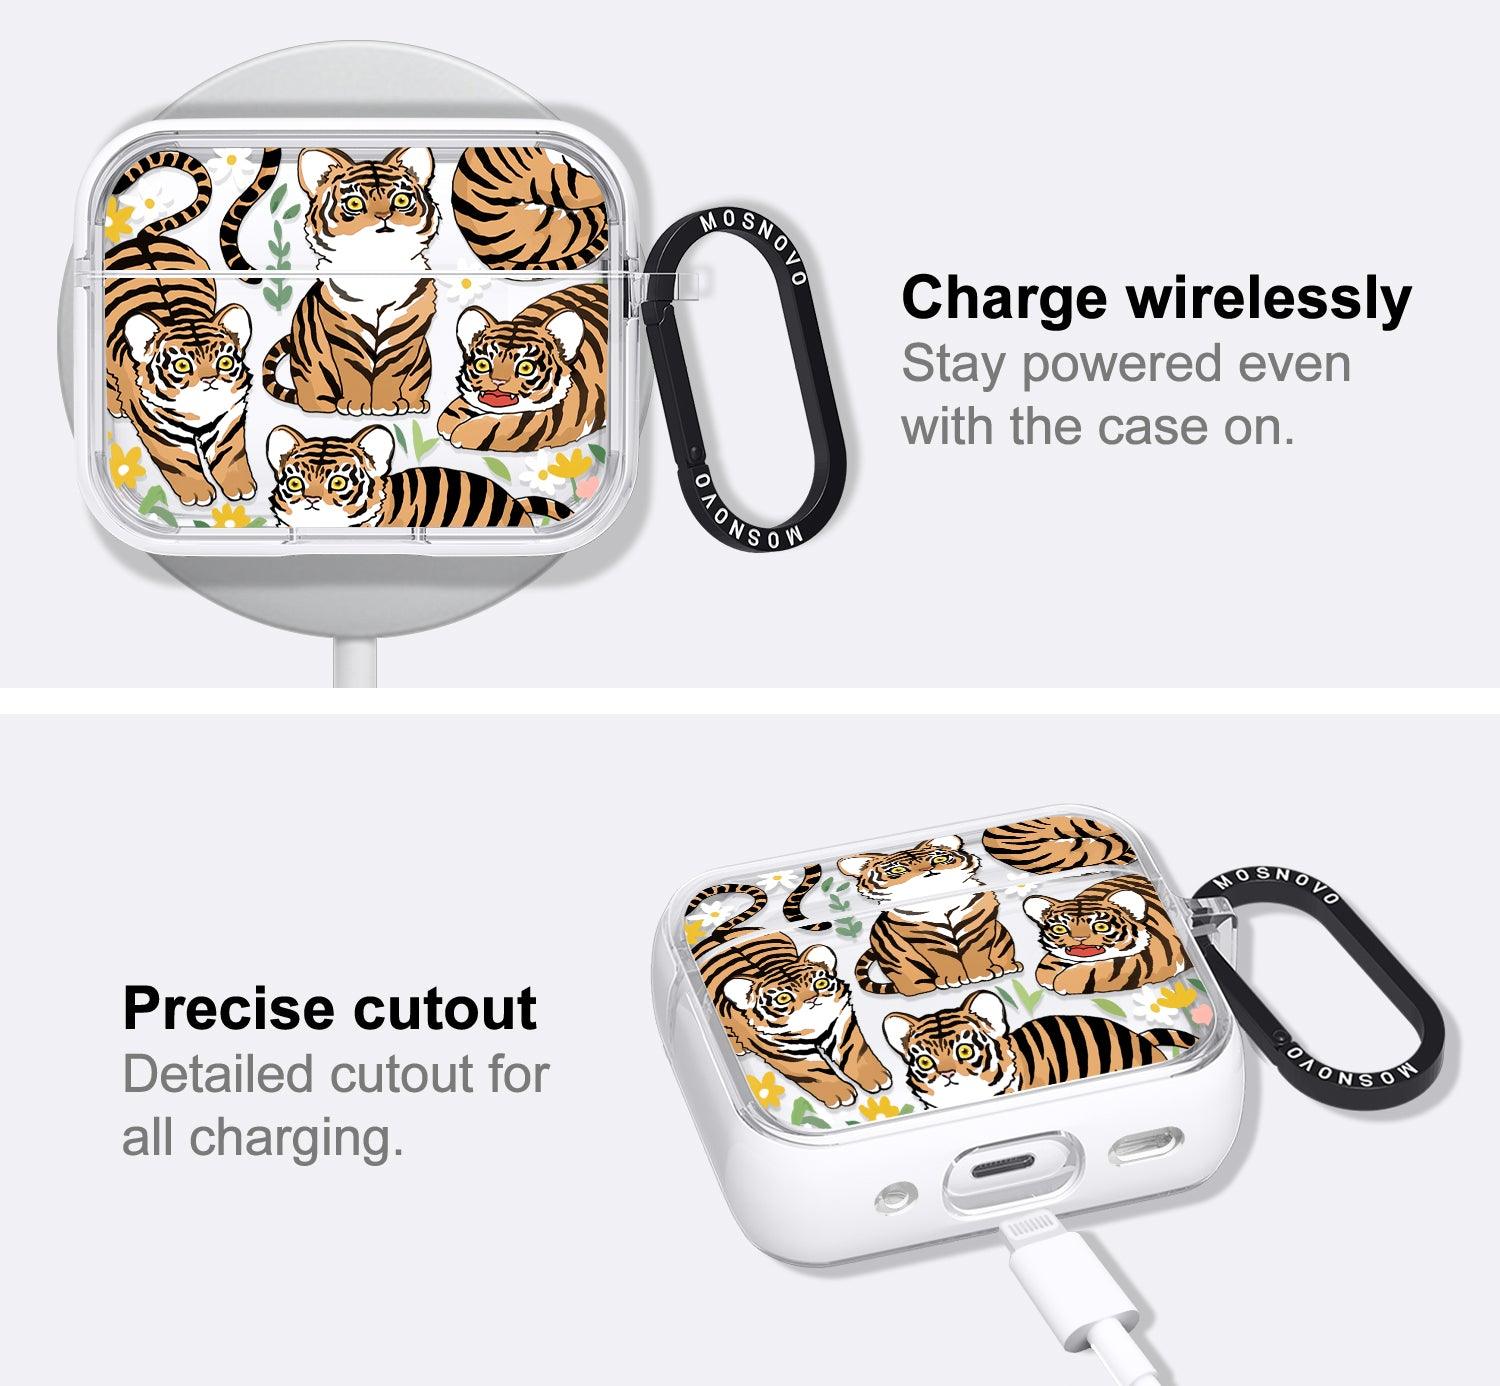 Cute Tiger AirPods 2 Case (2nd Generation) - MOSNOVO